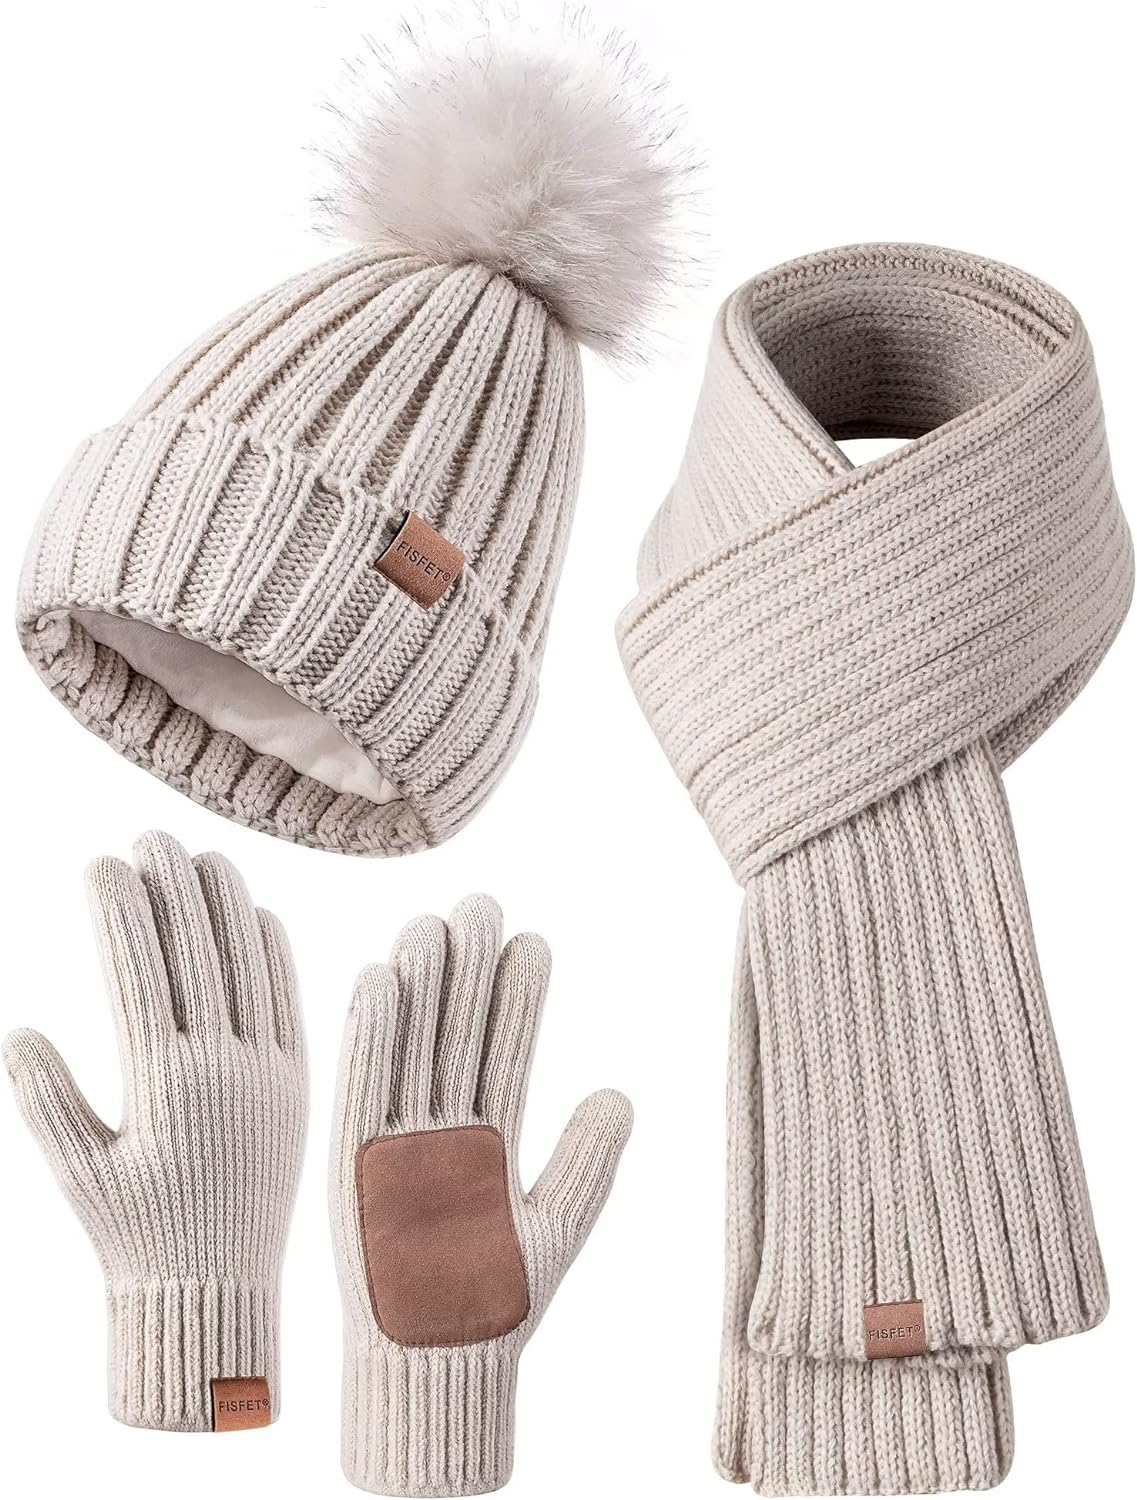 Limited-Time Offer! Winter Beanie Hat Scarf Gloves Set for Women - Now Only $29.99